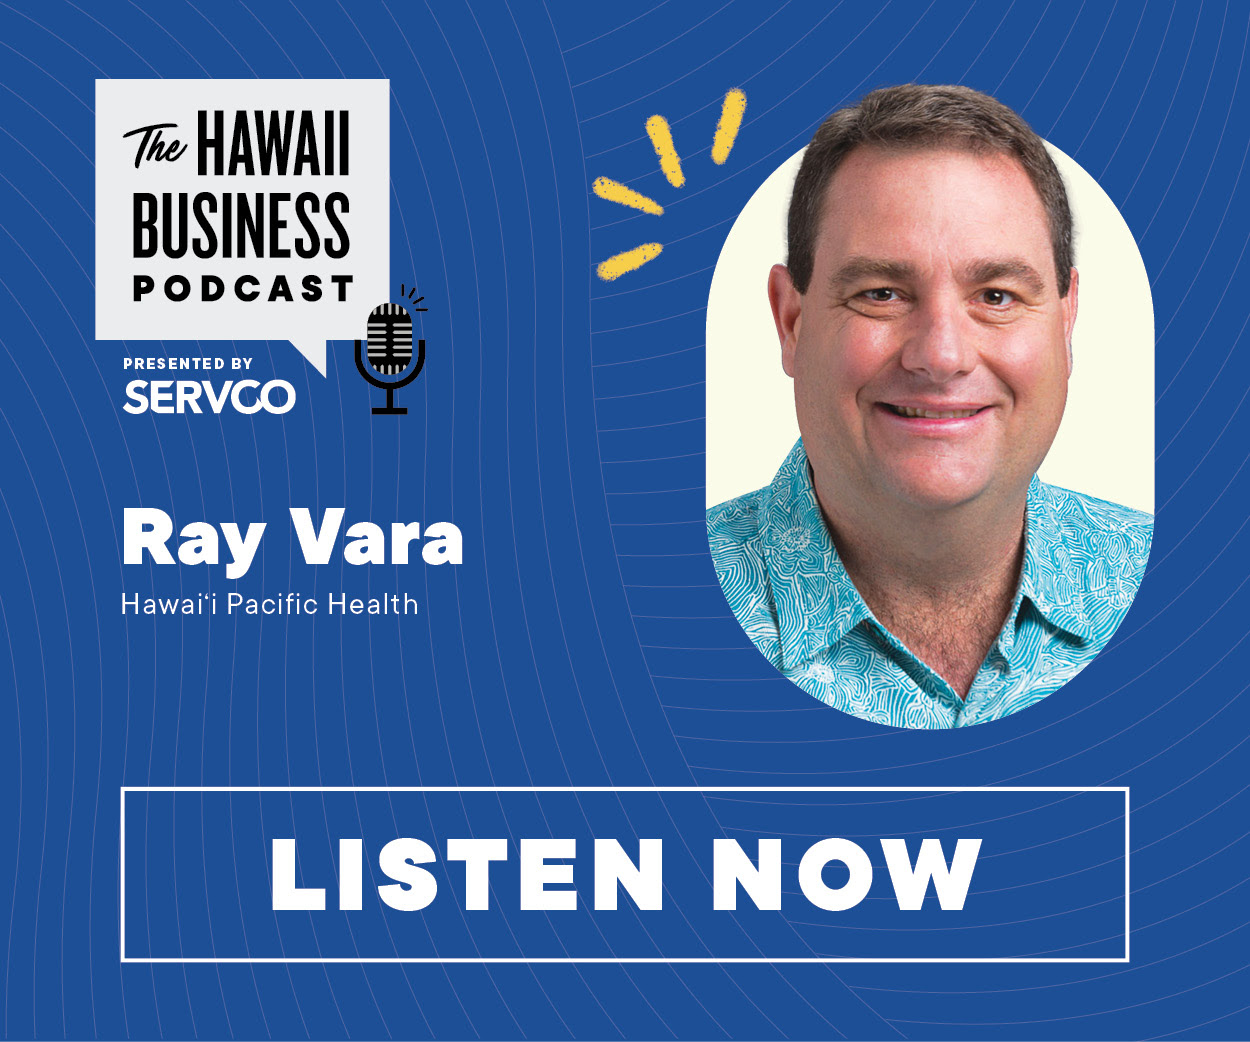 Click here to listen to the this episode of The Hawaii Business Podcast featuring Ray Vara of Hawaii Pacific Health!